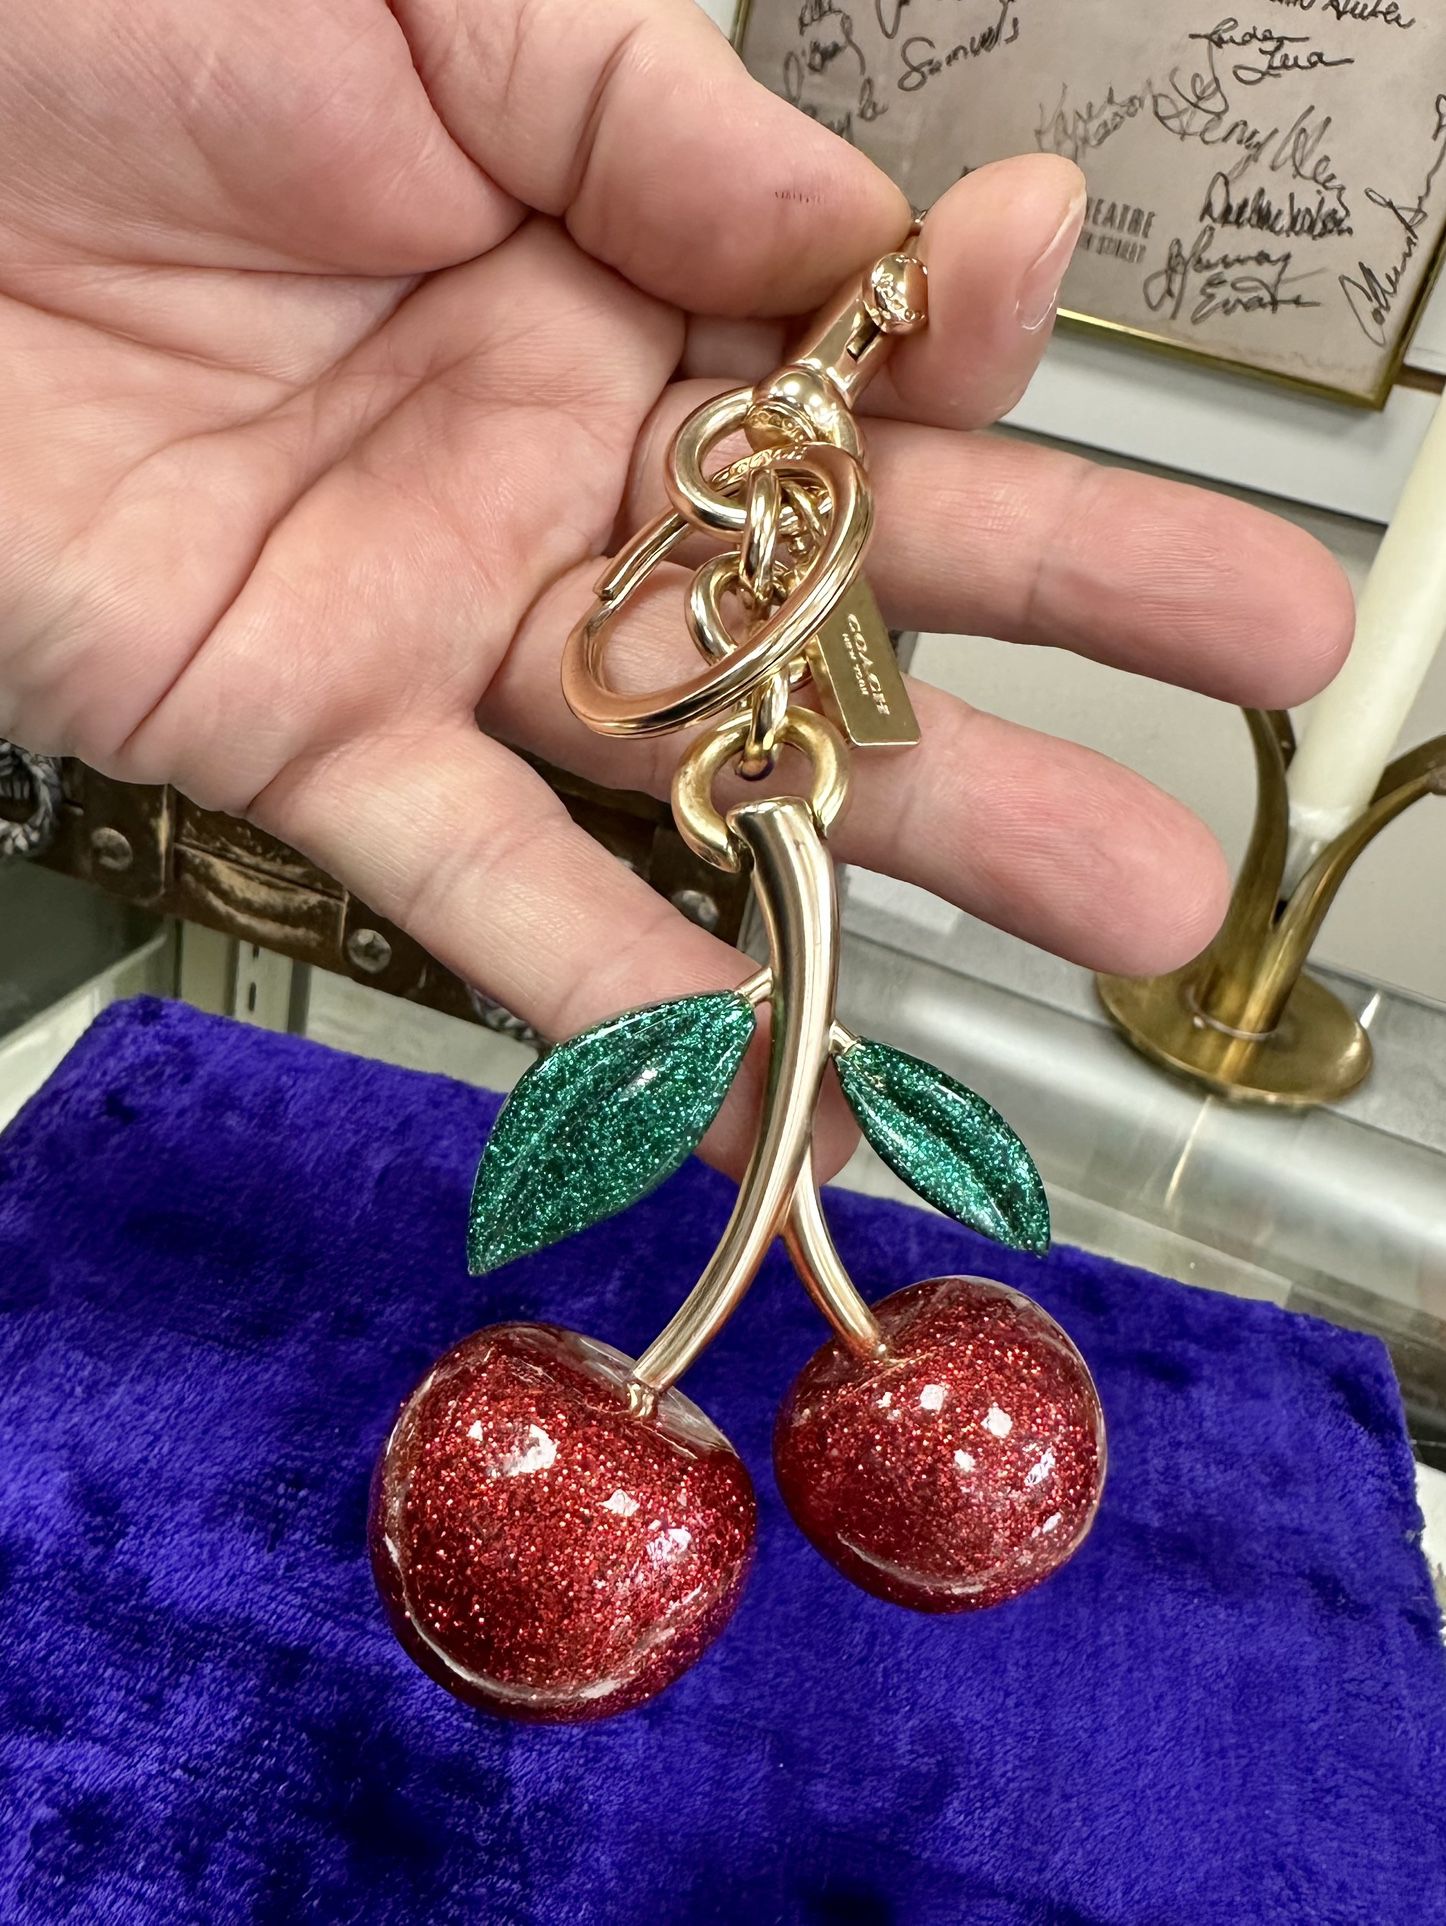 Auth COACH SIGNATURE CHERRY GOLD BAG CHARM TOTE